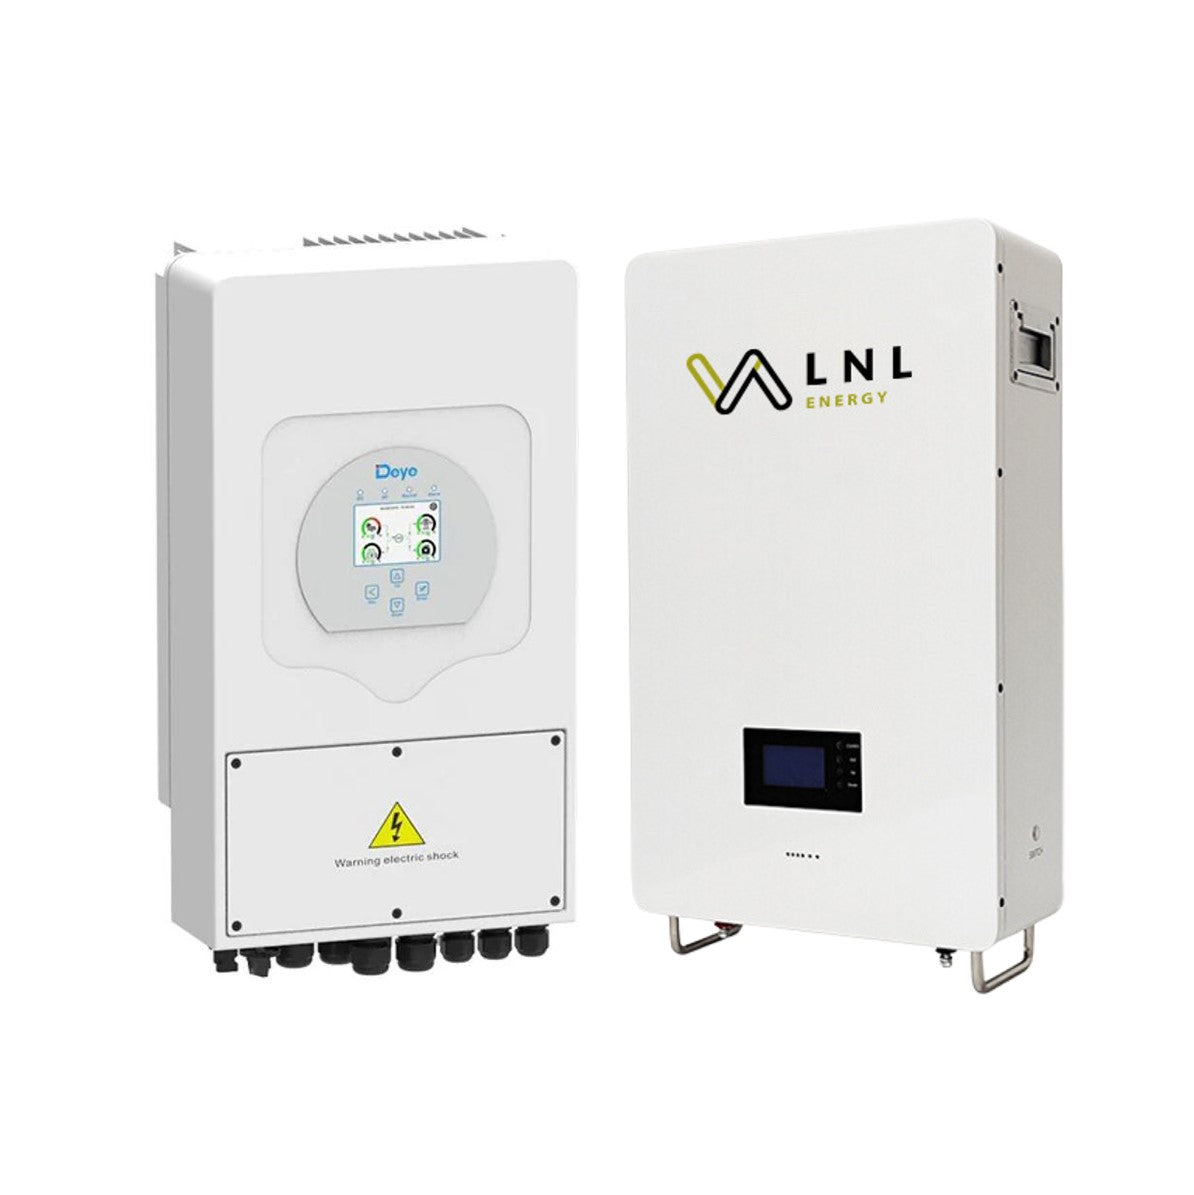 Package A1 - 5kW Deye and LNL Energy backup system